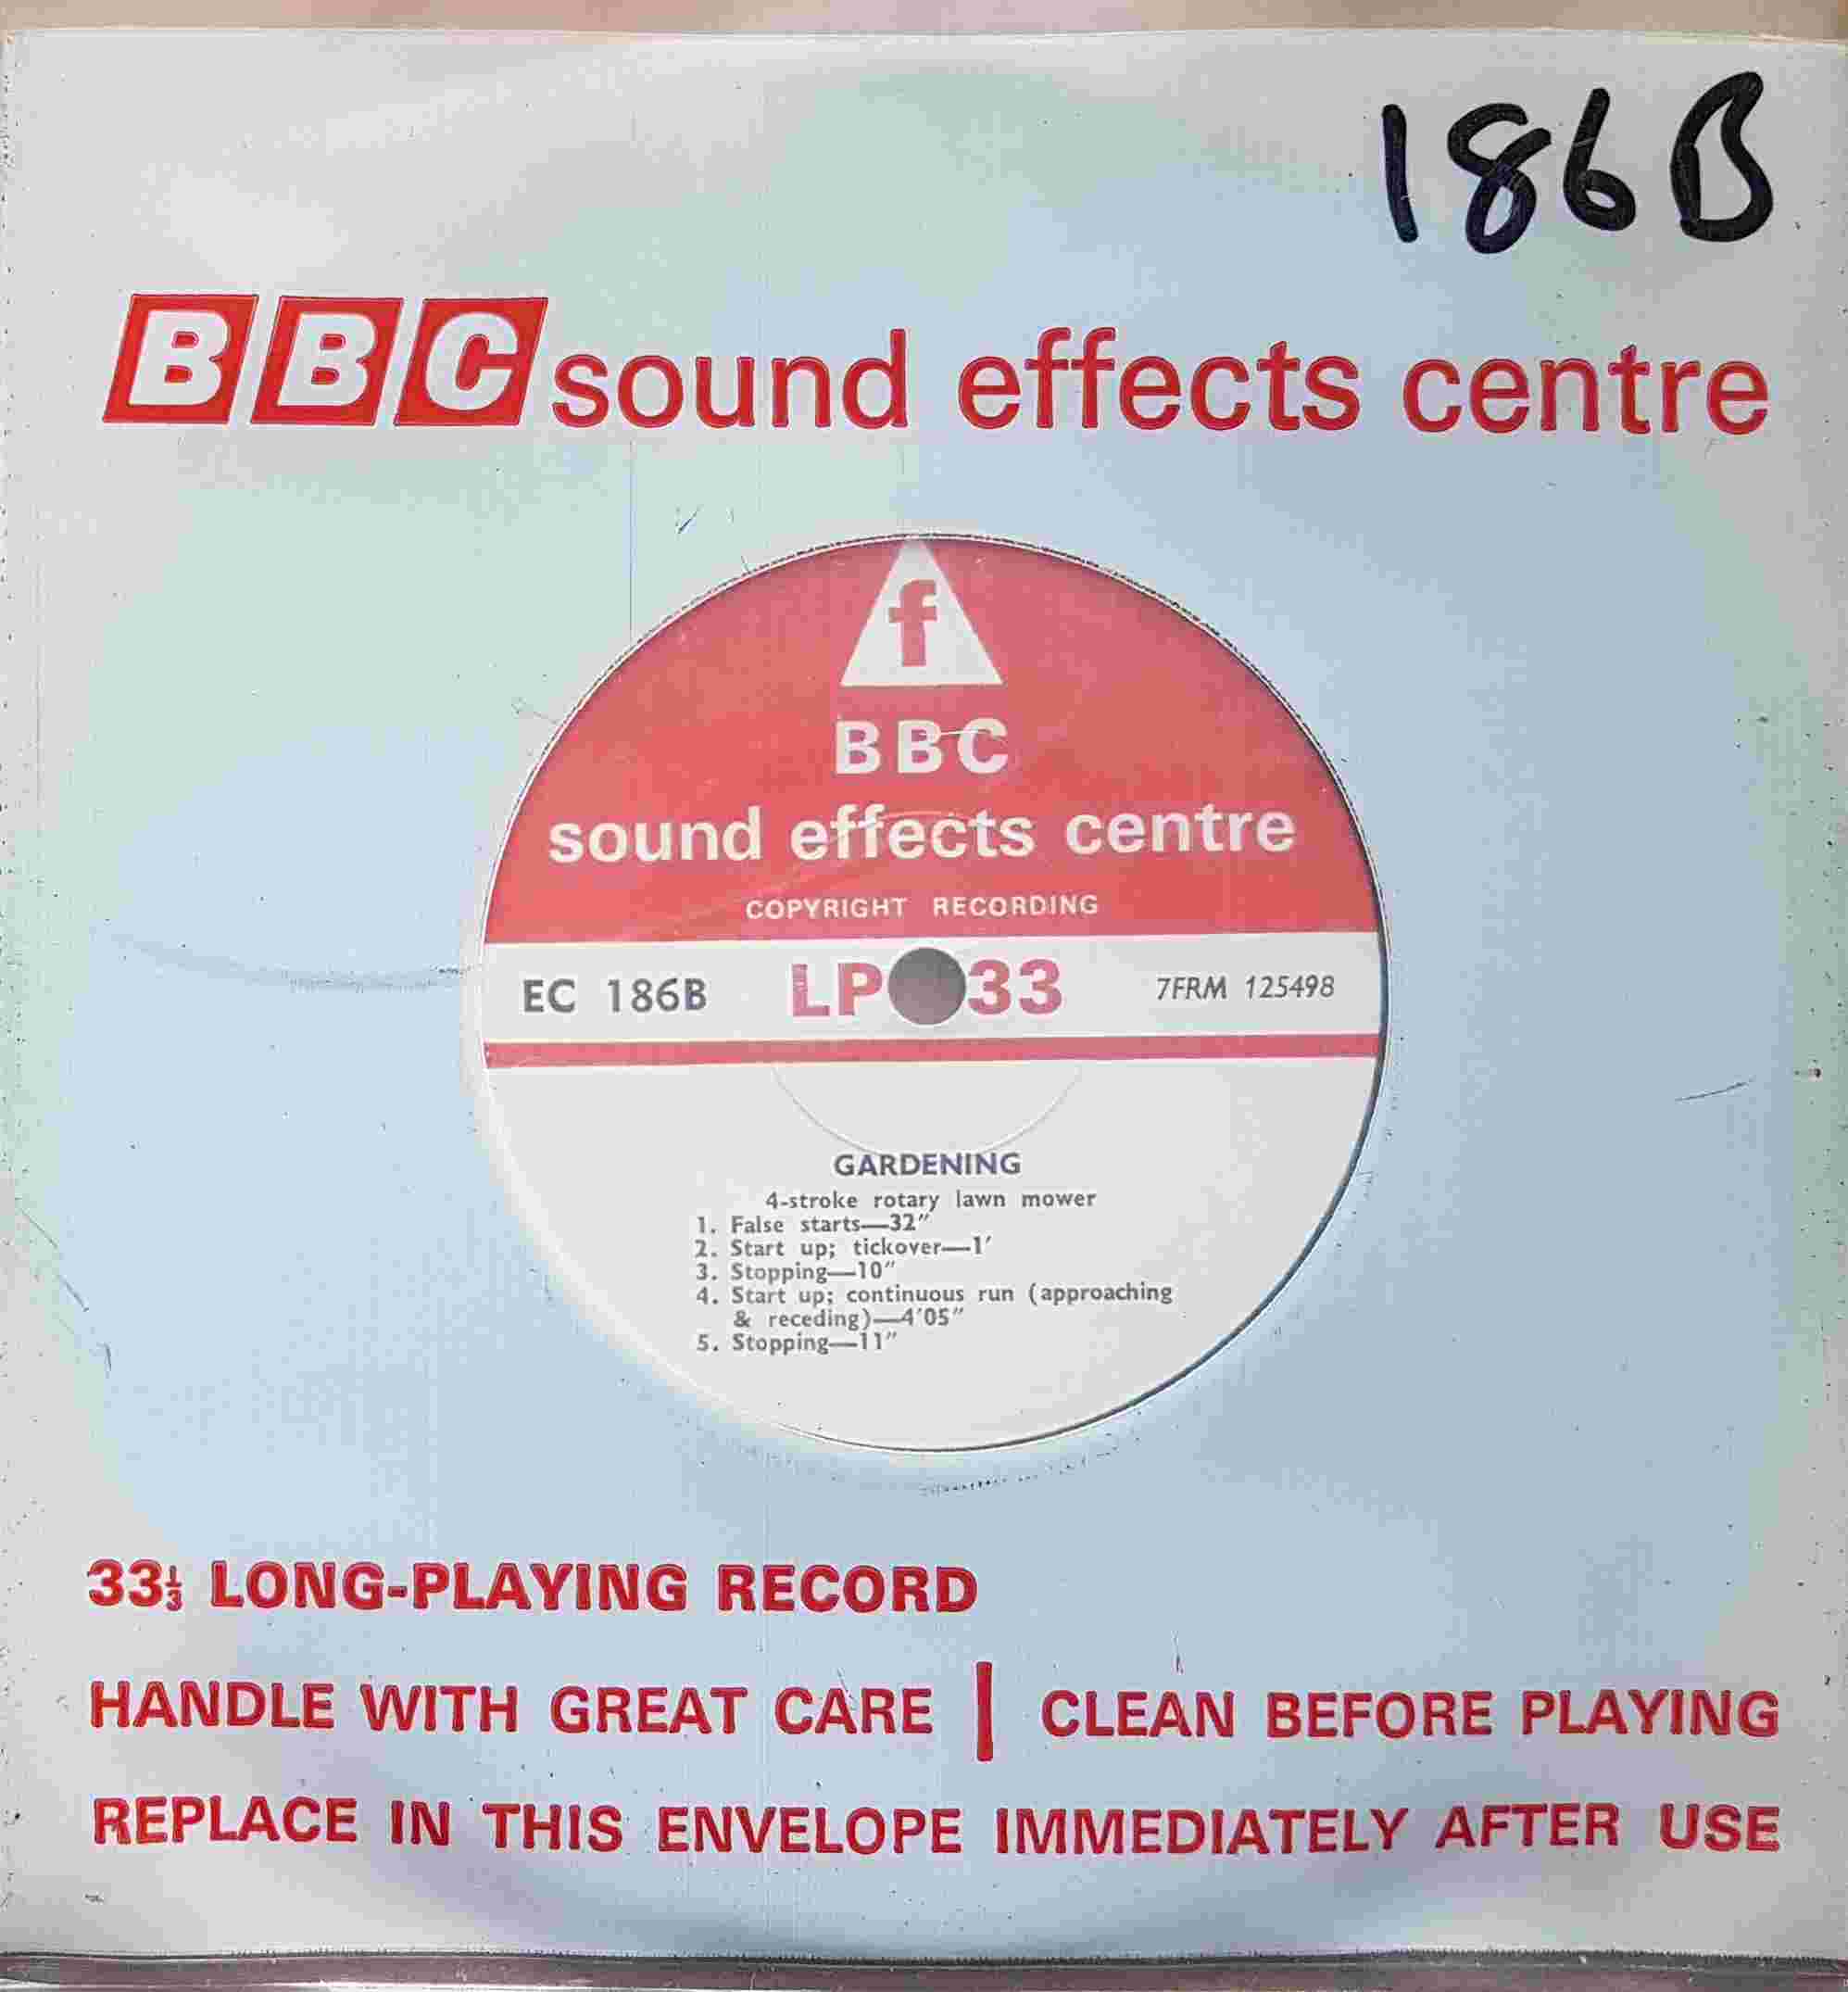 Picture of EC 186B Gardening by artist Not registered from the BBC records and Tapes library